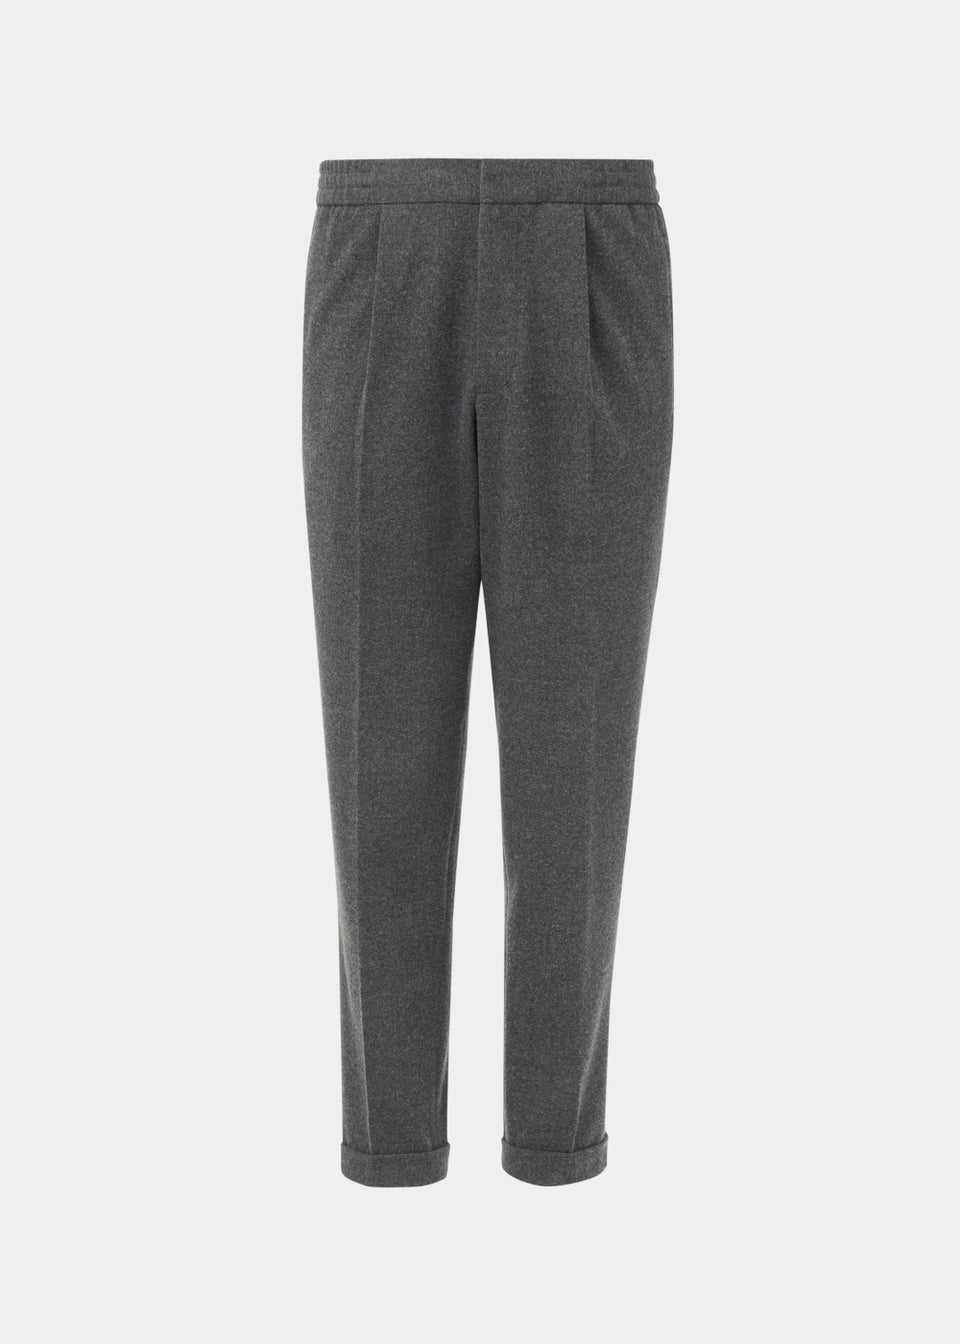 Taylor & Wright Charcoal Tapered Fit Trousers